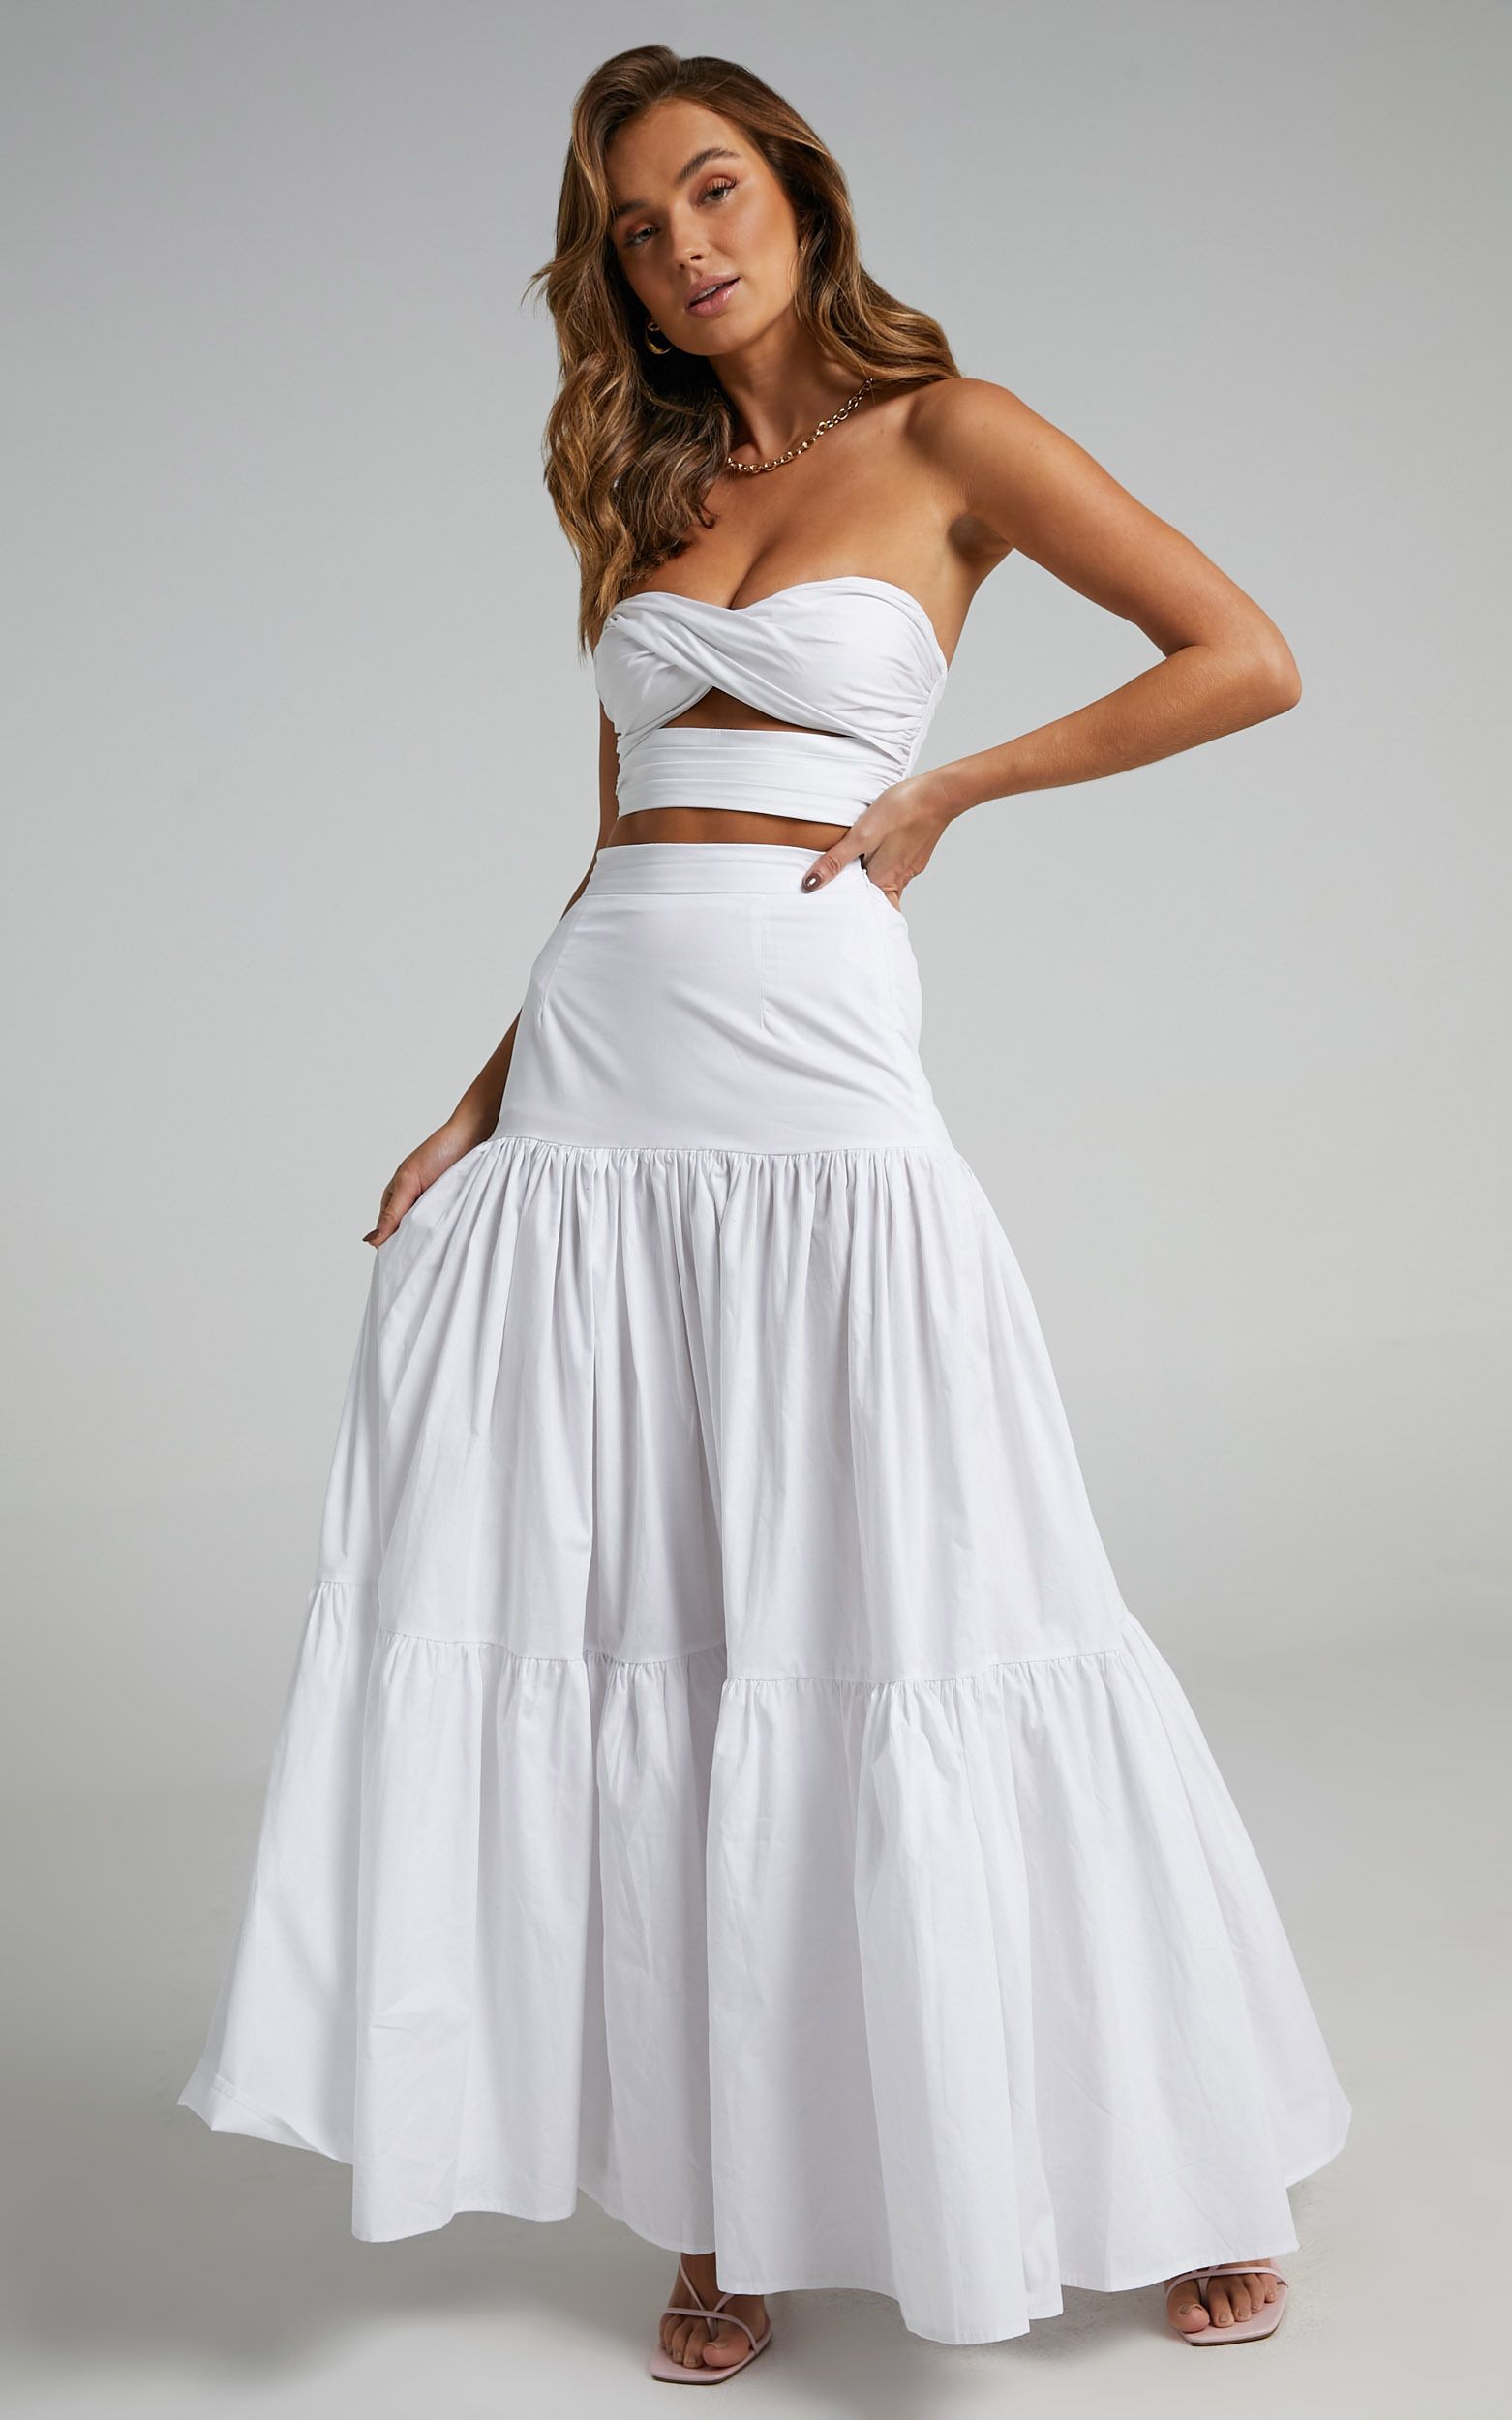 Runaway The Label - Ayla Maxi Skirt in White | Showpo - deactived